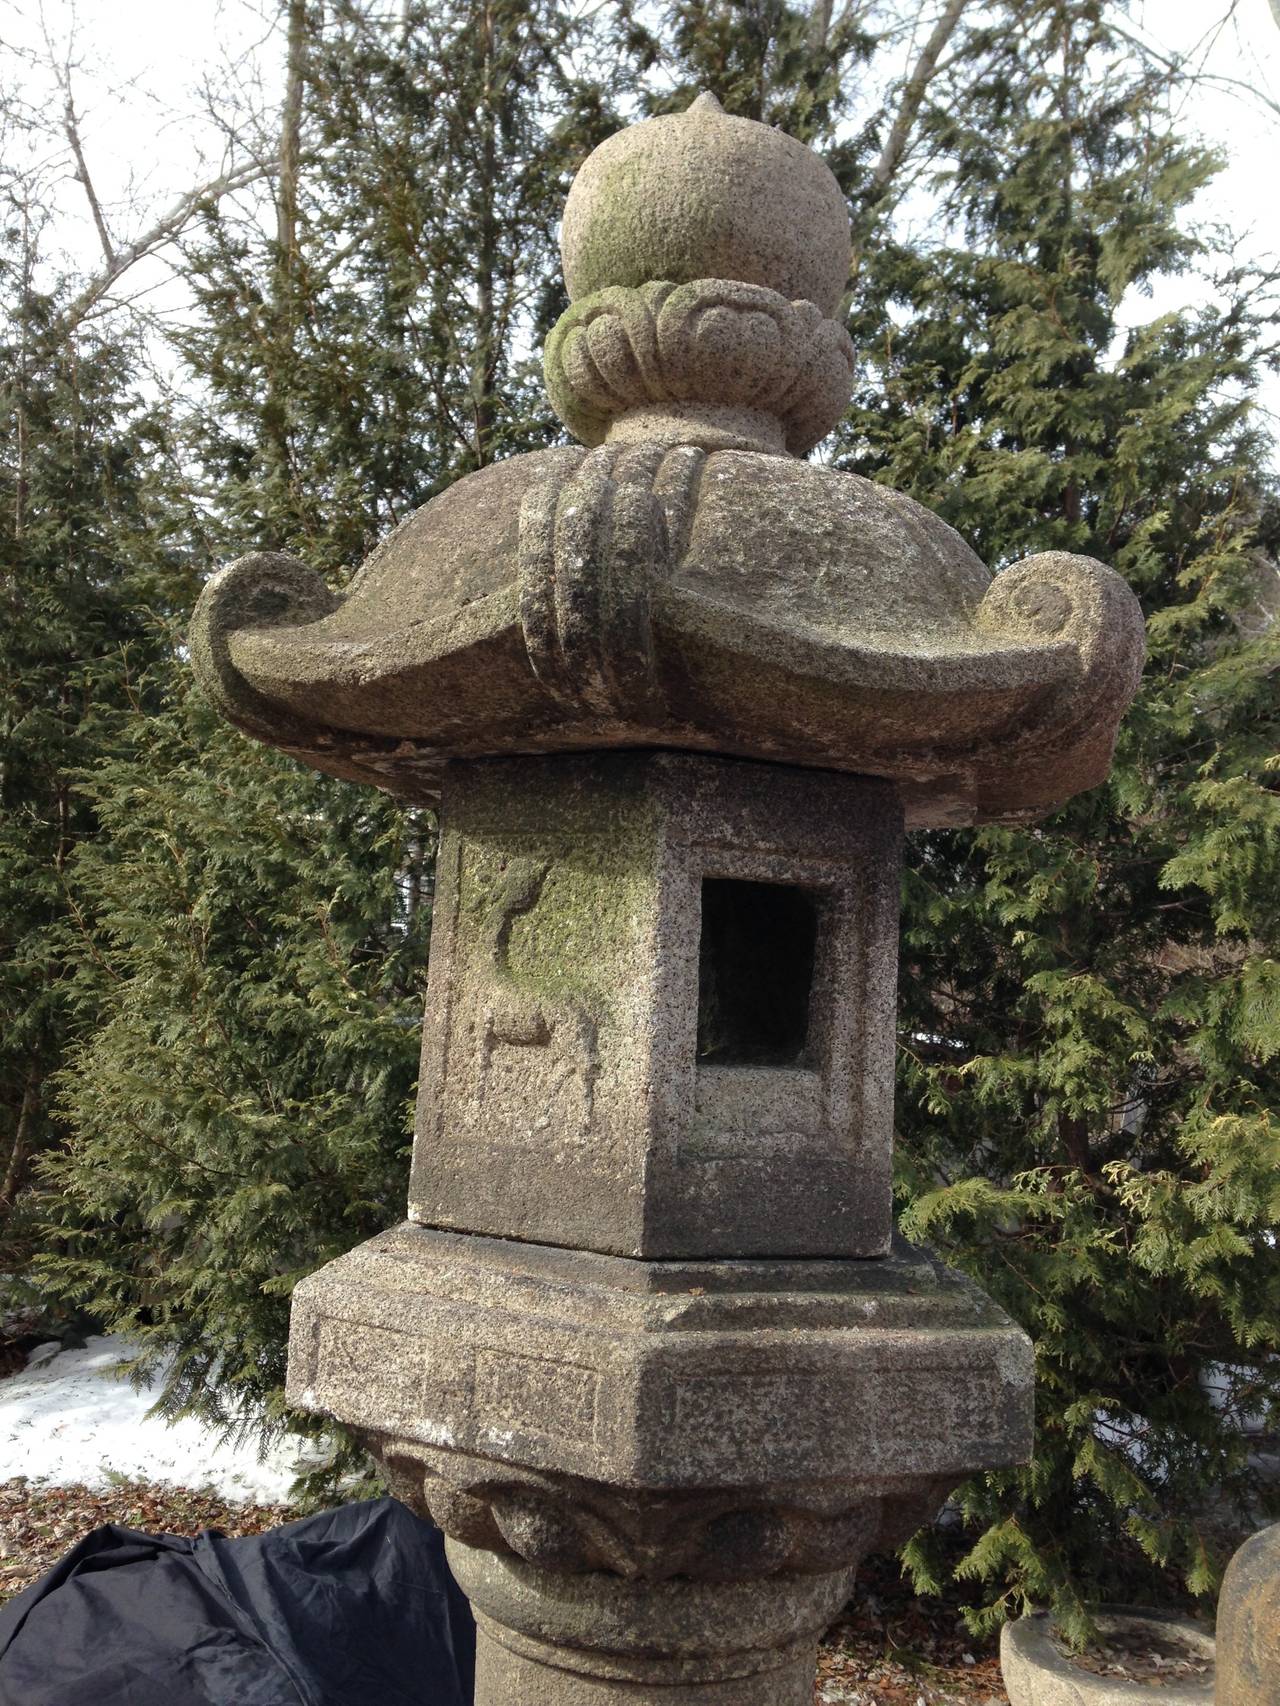 Japan, a classic hand carved stone  Kasuga lantern, 210cm, 7 feet high, solid granite,  Meiji to Taisho period, (1900-1926 CE)

The monumental and well proportioned carved stone Kasuga style lantern fashioned in six parts with an incised finial